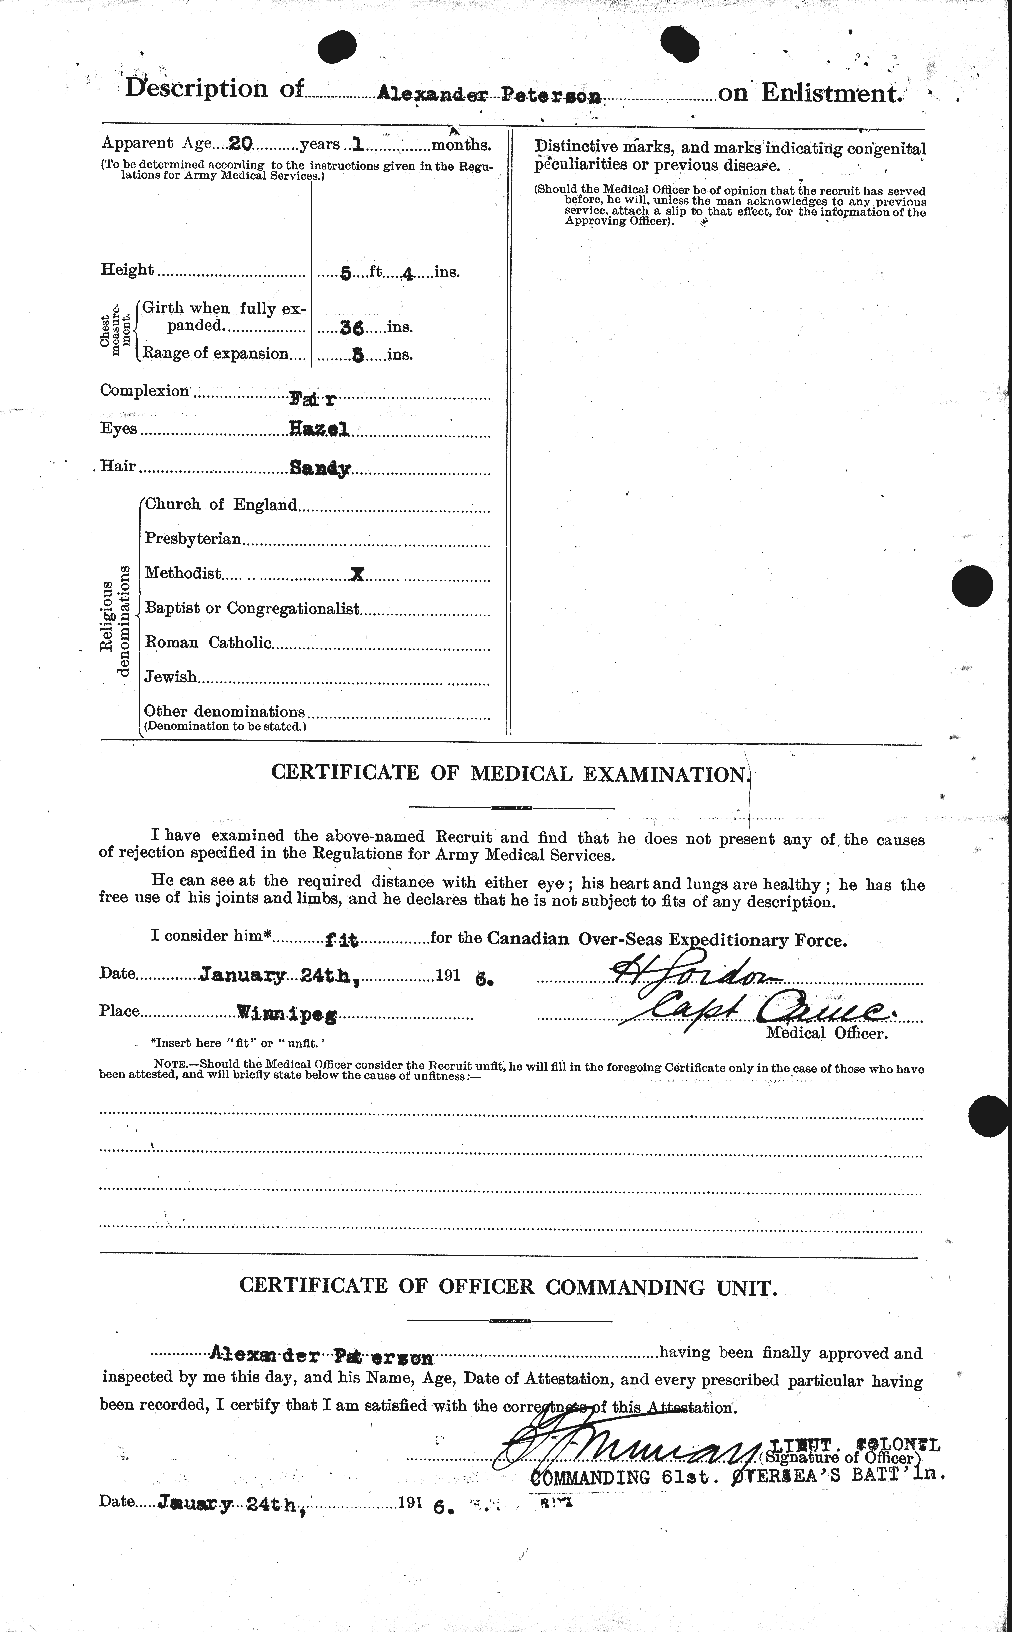 Personnel Records of the First World War - CEF 567511b